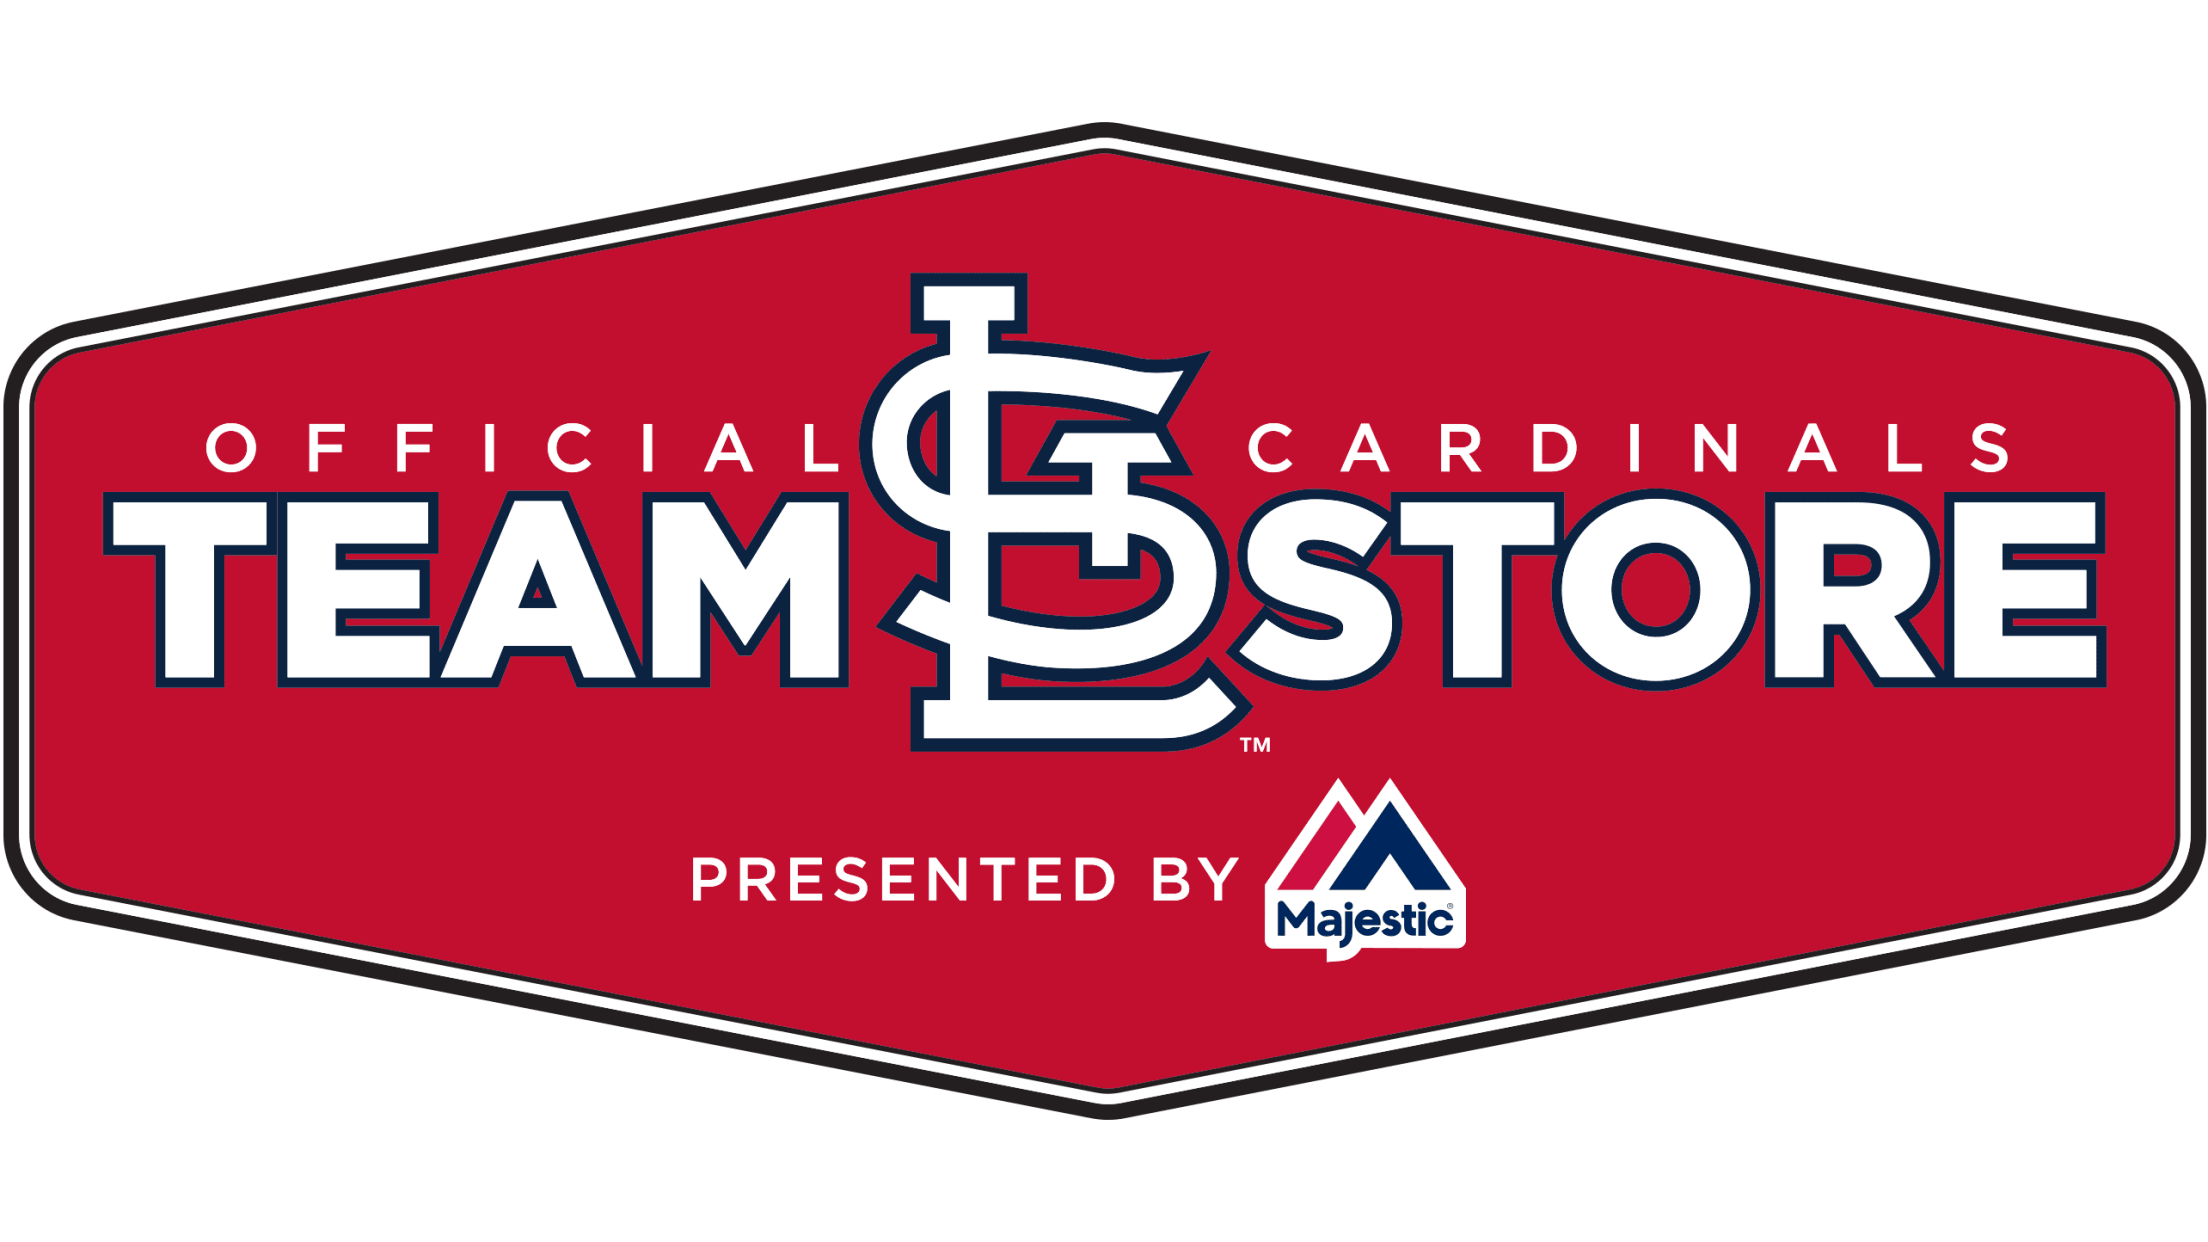 St. Louis Cardinals - FANS-GIVING is here! The Official #STLCards Team Store  is giving 25% off storewide through 11/29.